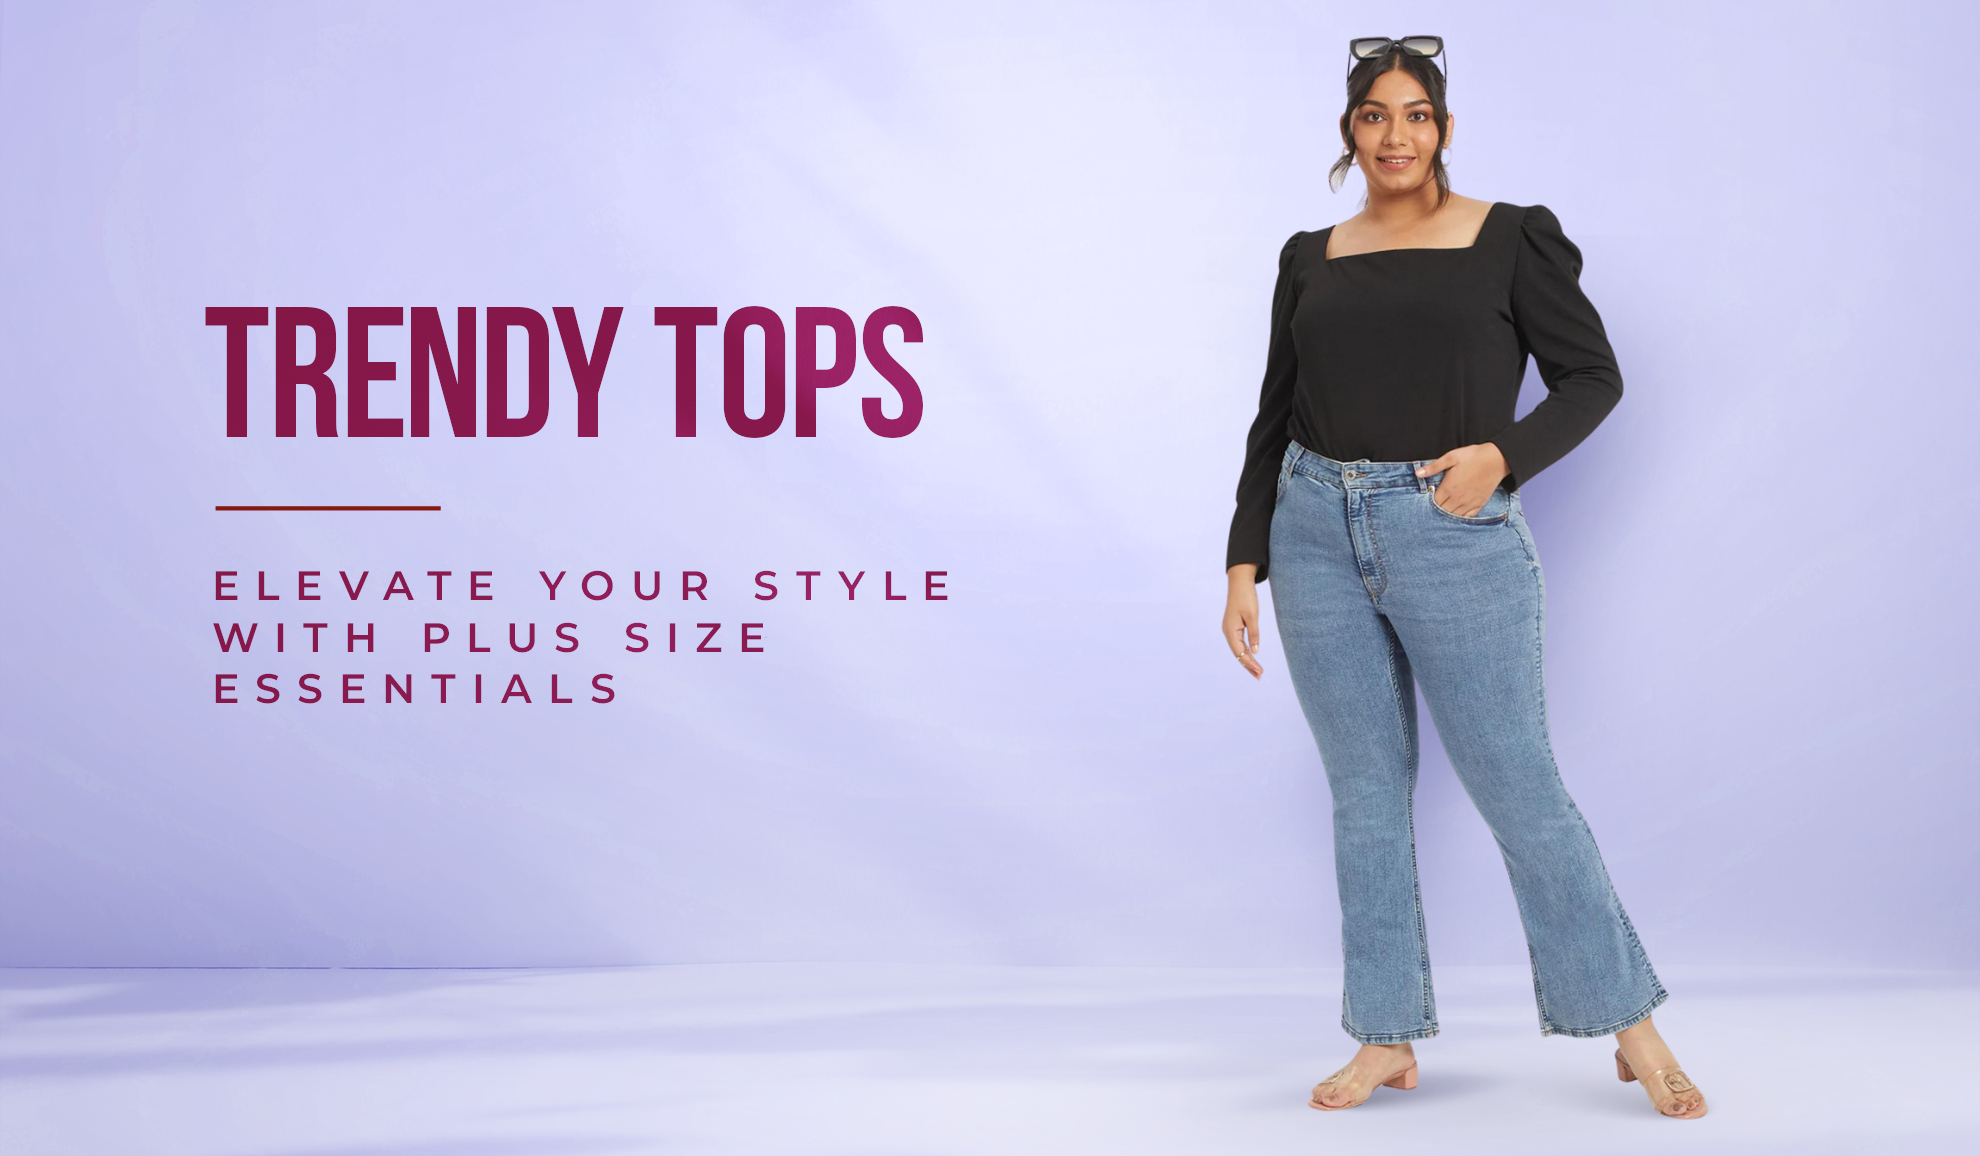 Large sizes for women, what should I wear? – Reme Antón Modas